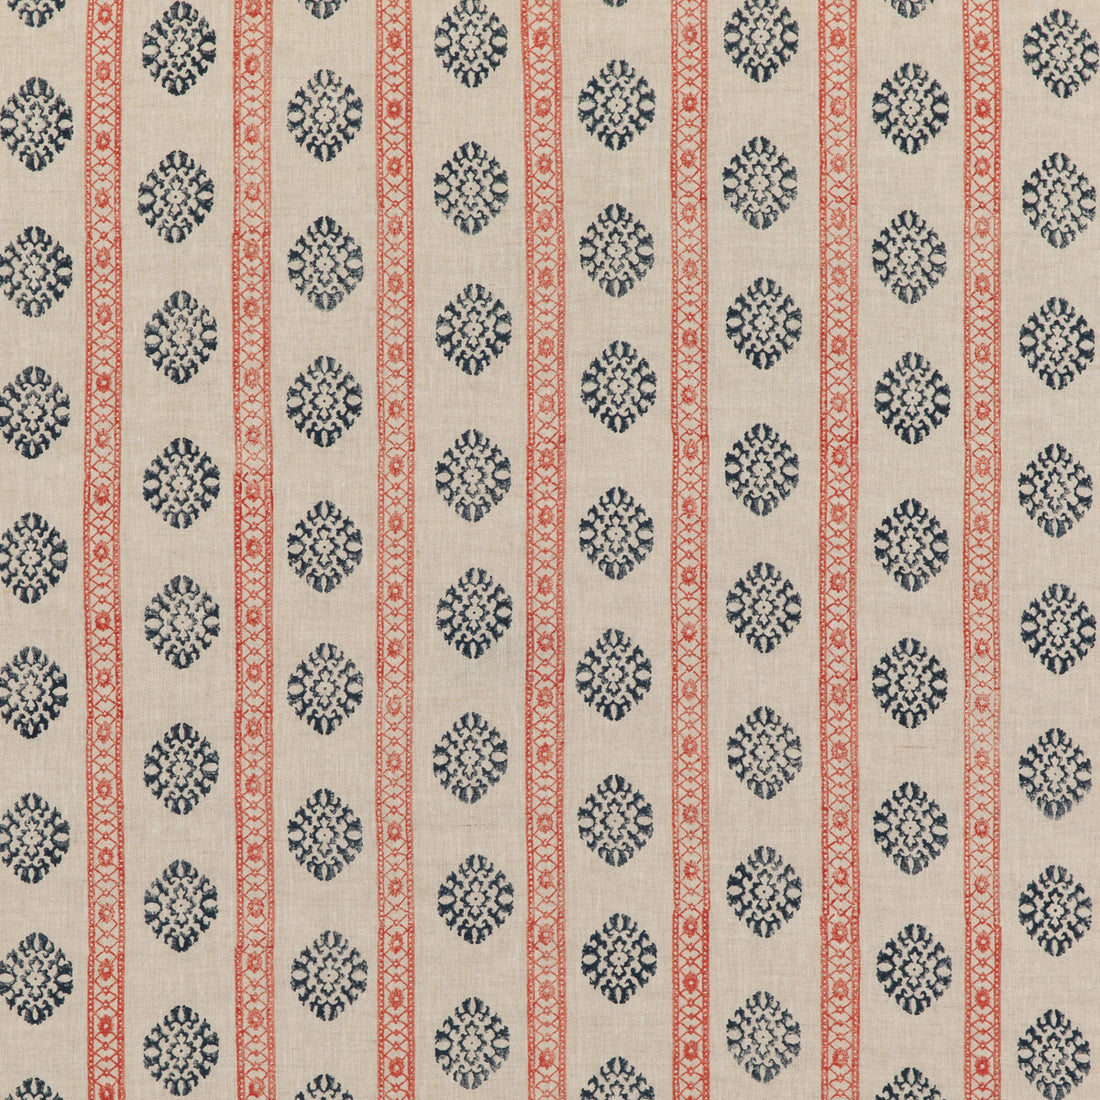 Alma fabric in red/indigo color - pattern BP10821.1.0 - by G P &amp; J Baker in the Coromandel Small Prints collection